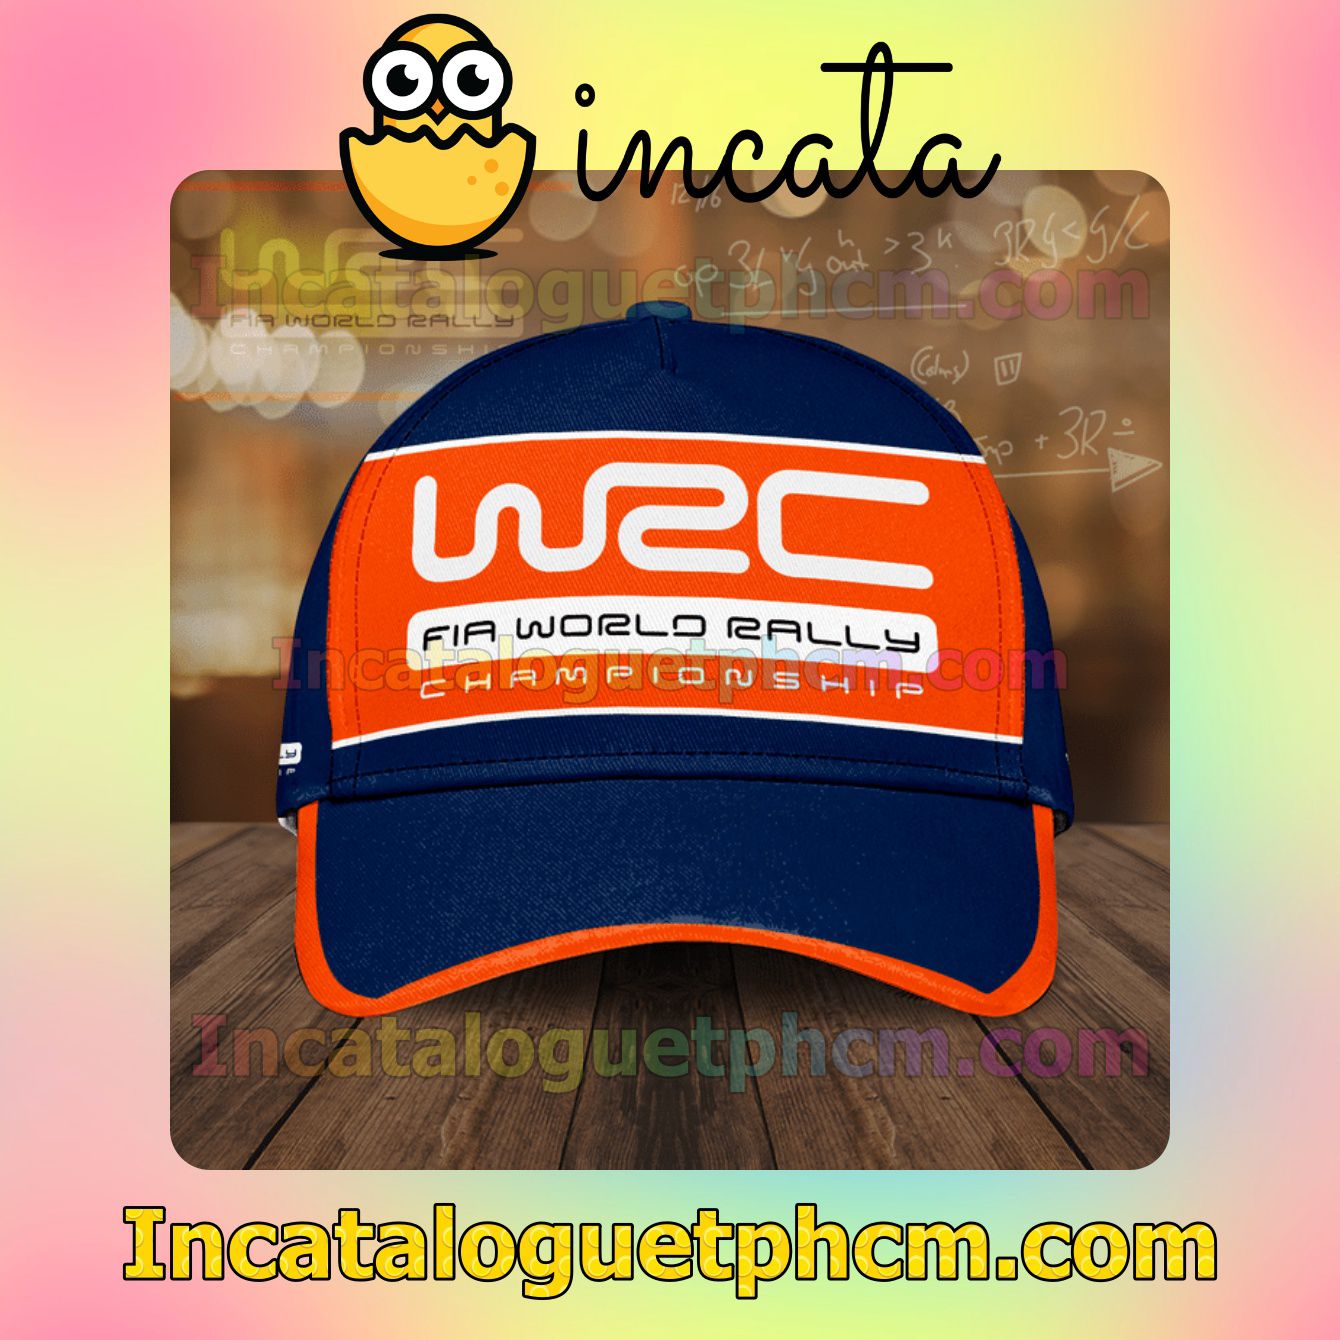 Wrc Fia World Rally Championship Orange And Blue Classic Hat Caps Gift For Men